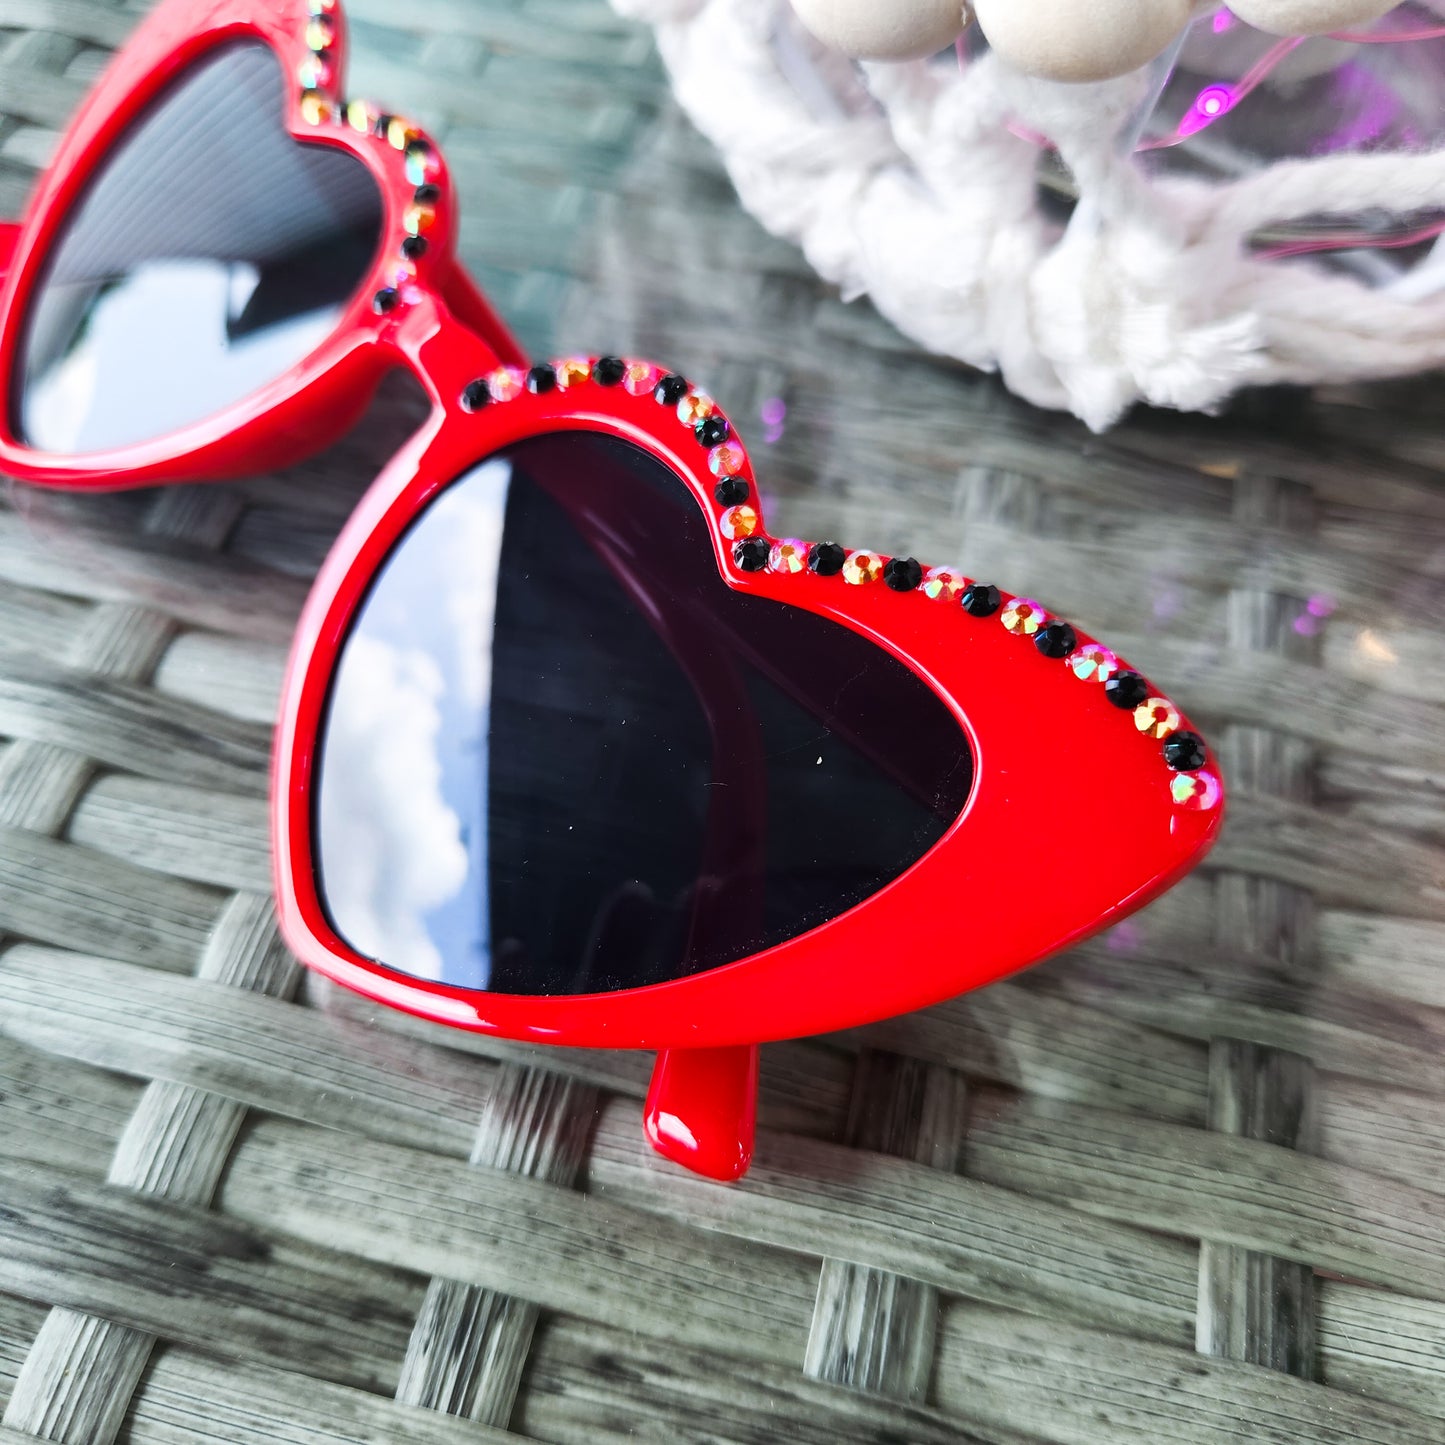 Rose Red Heart Shaped Sunnies with Black and Multicolor Rhinestone Accents